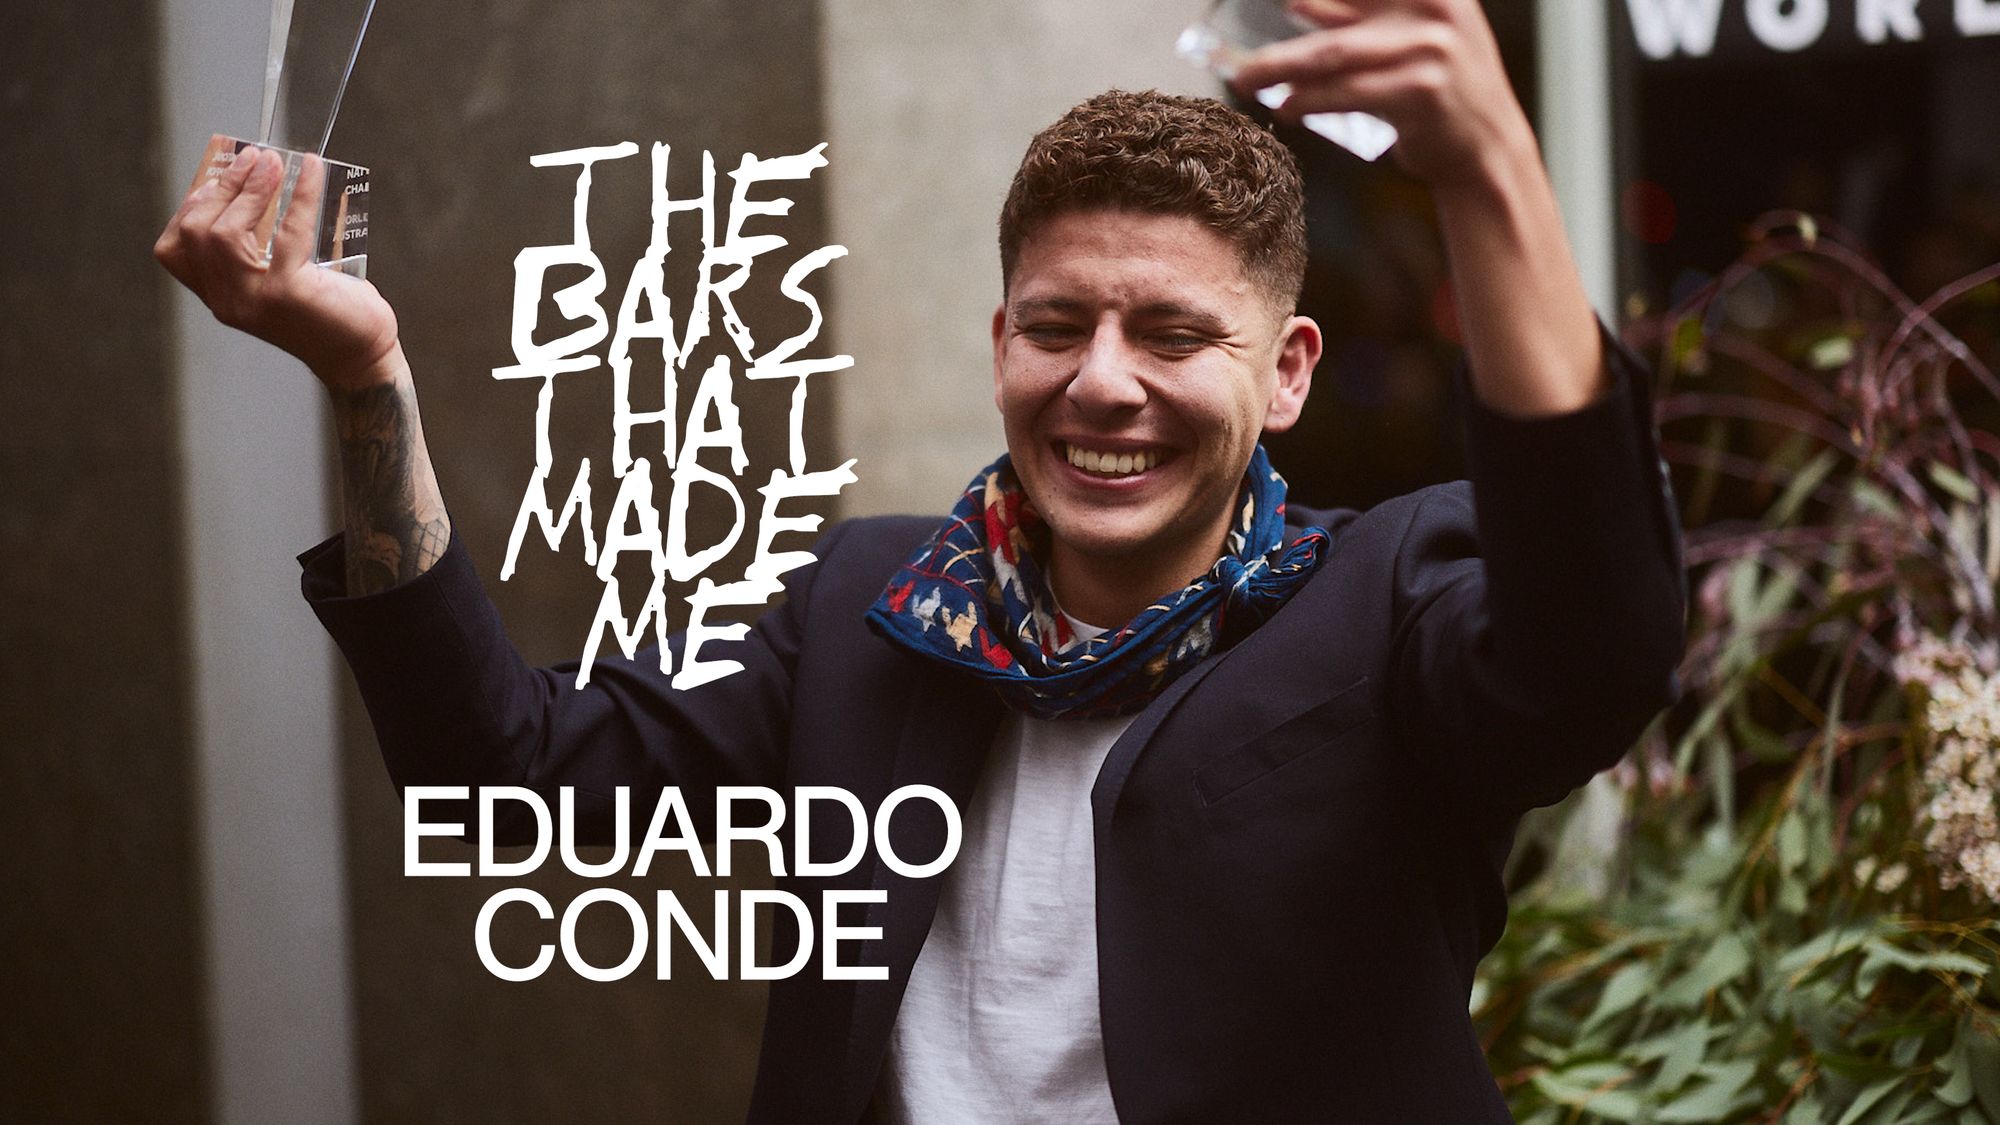 This is what makes Eduardo Conde a World Class winning bartender